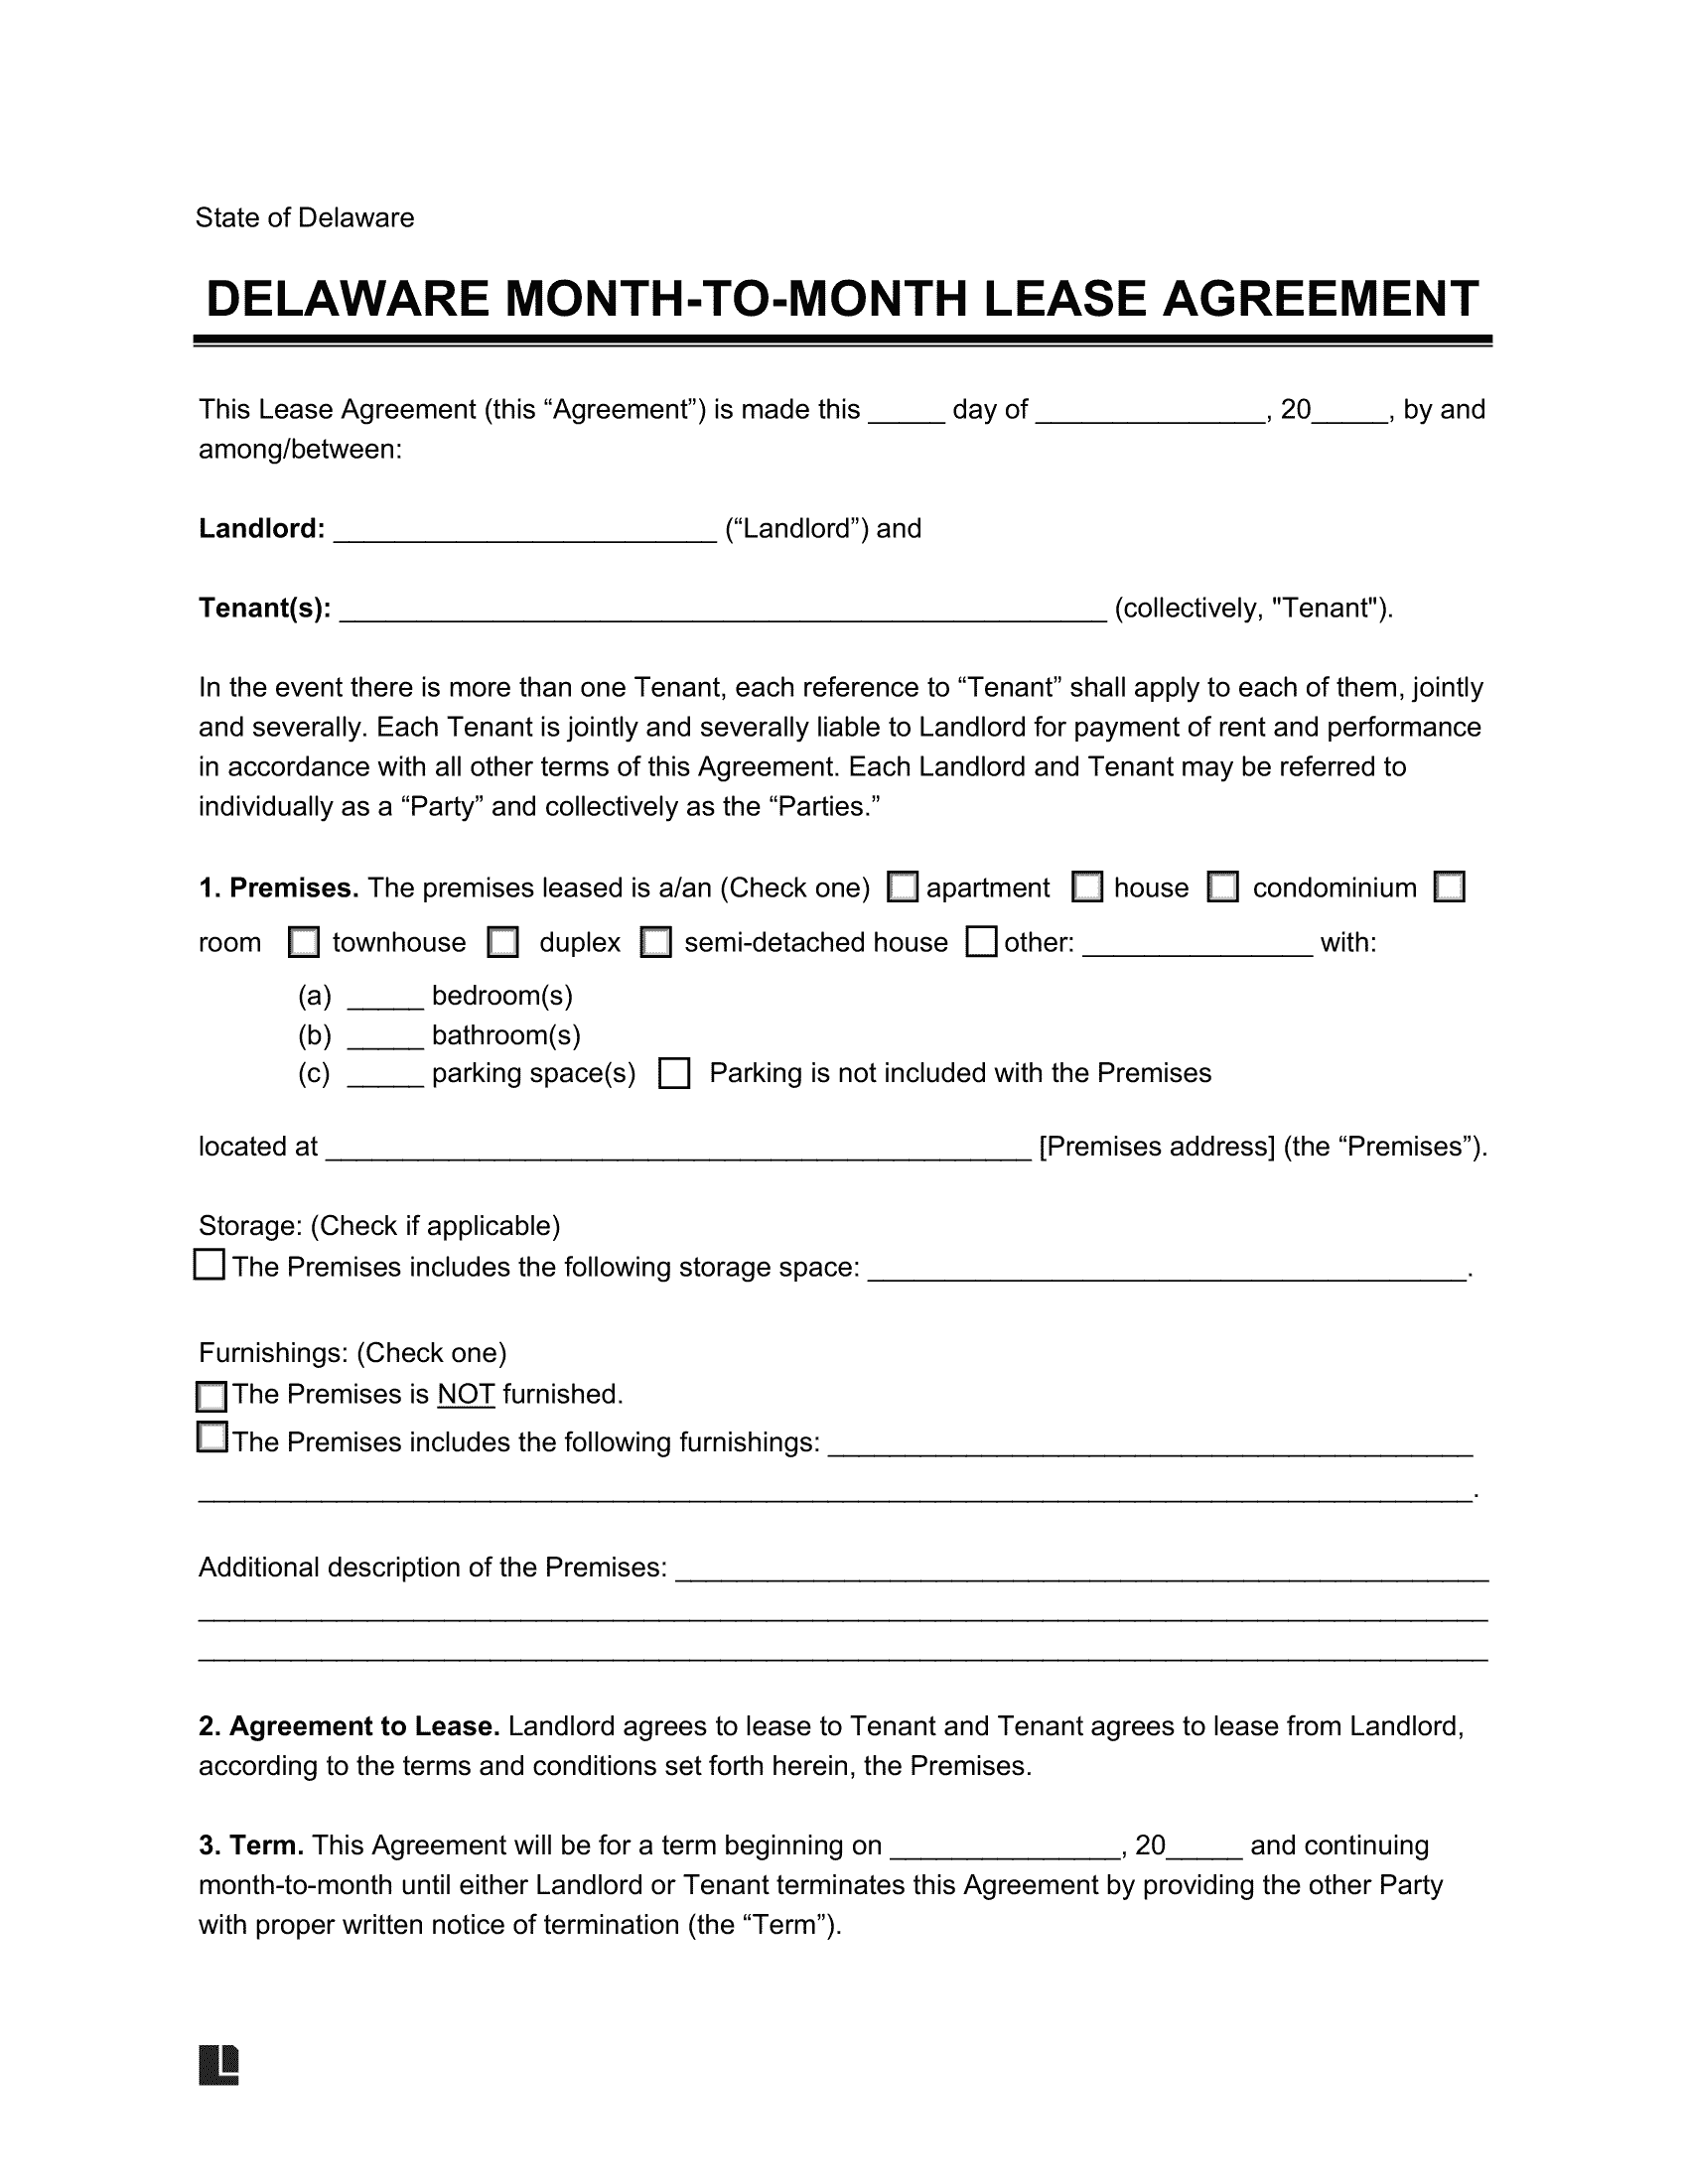 Delaware Month-to-Month Rental Agreement